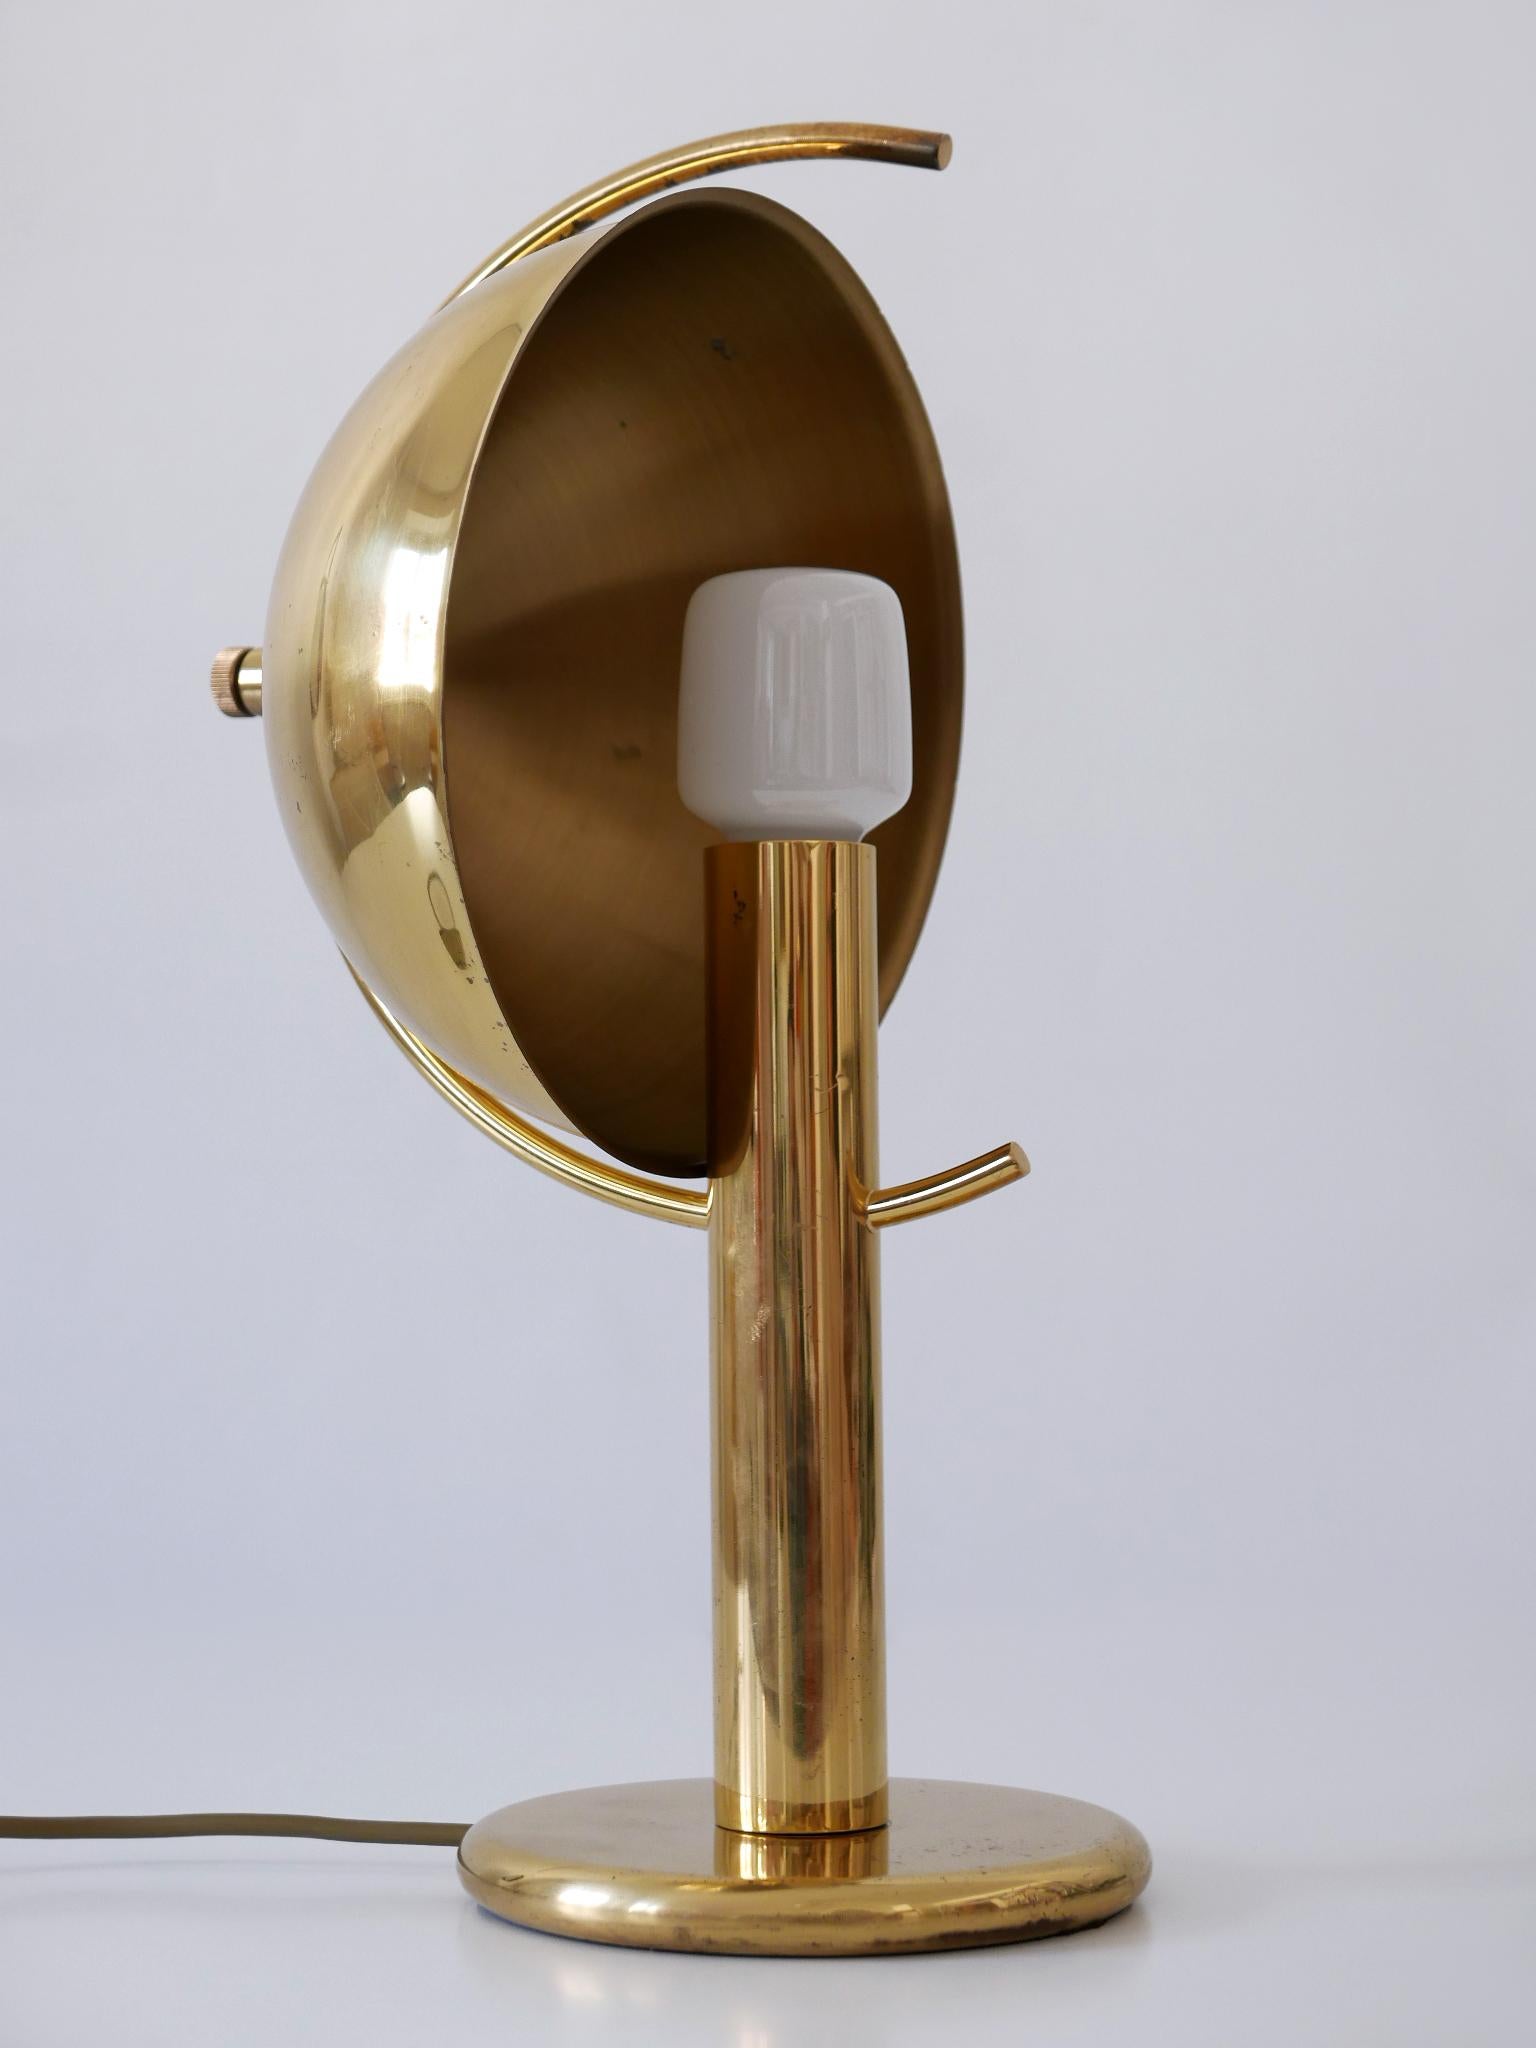 Exceptional Mid-Century Modern Brass Table Lamp by Gebrüder Cosack Germany 1960s For Sale 10